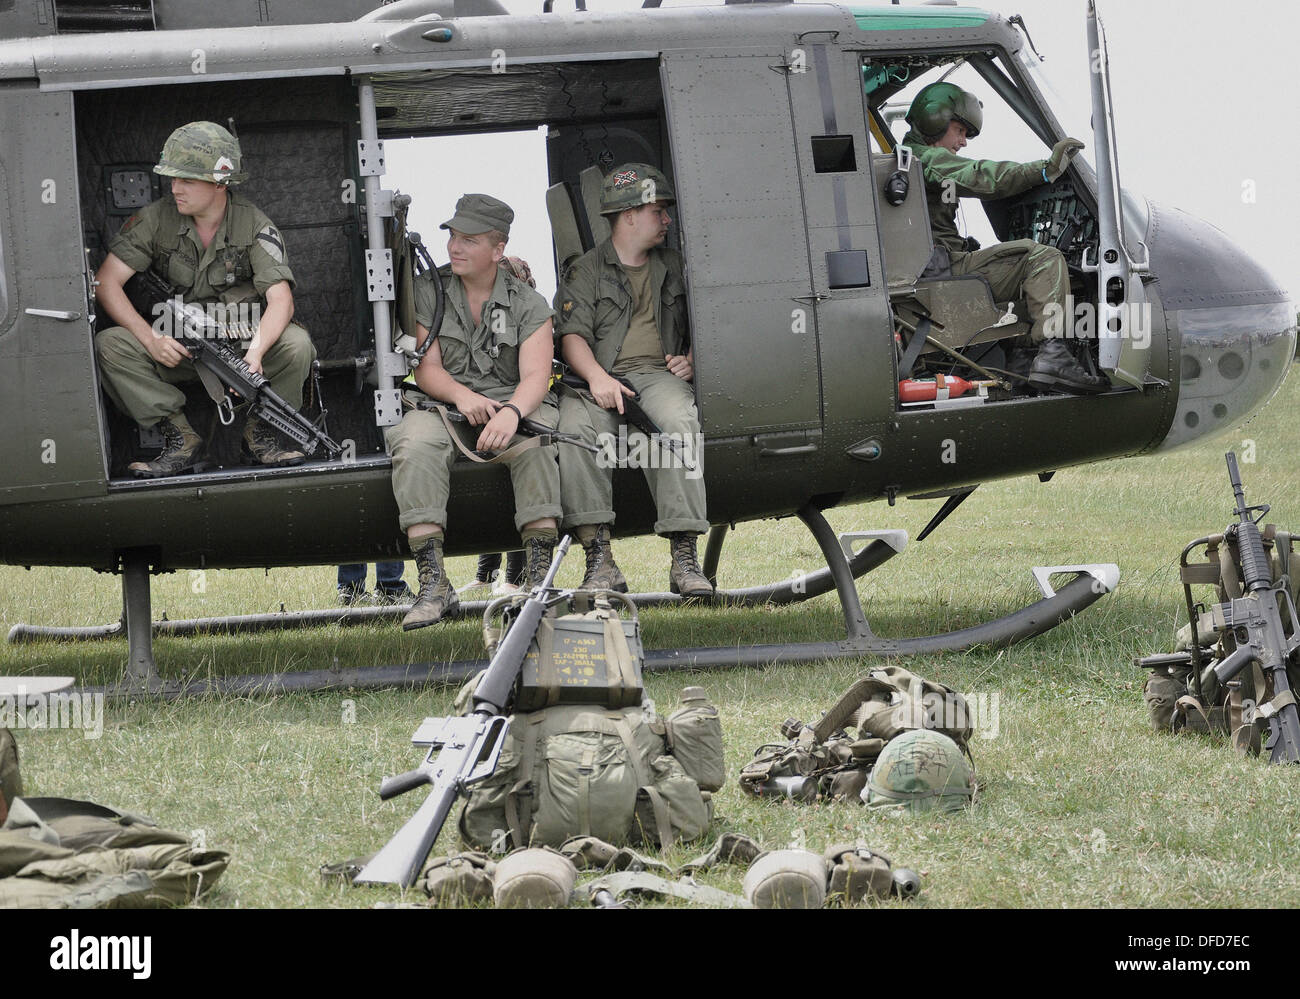 Bell UH-1 'Huey' US Army helicopter with re-enactors to represent Vietnam War scenario. Image 'aged' digitally to seventies era faded colour. Stock Photo